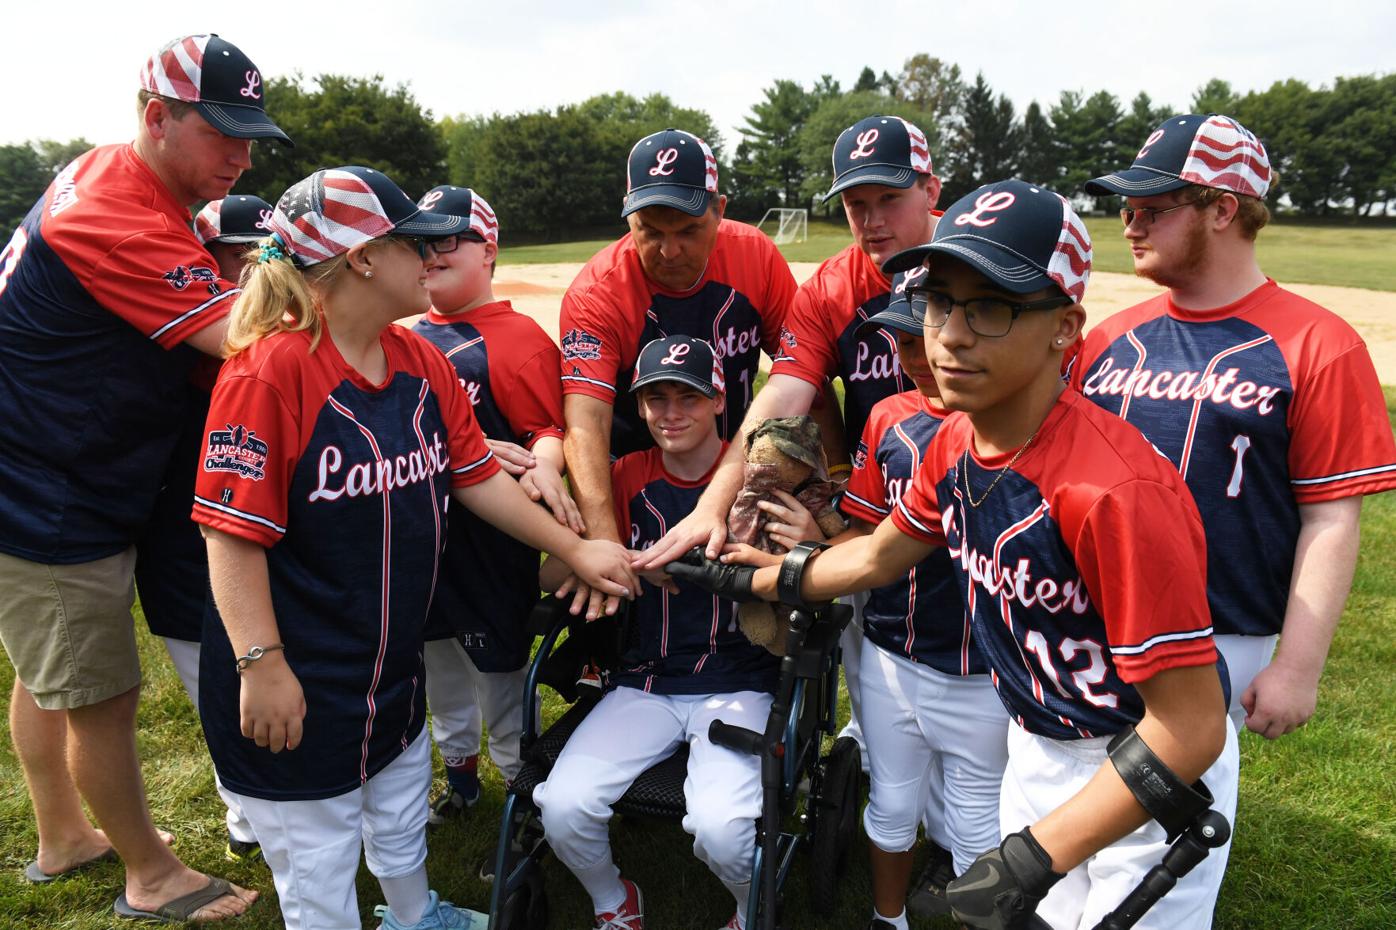 Female catcher is thriving in Little League World Series